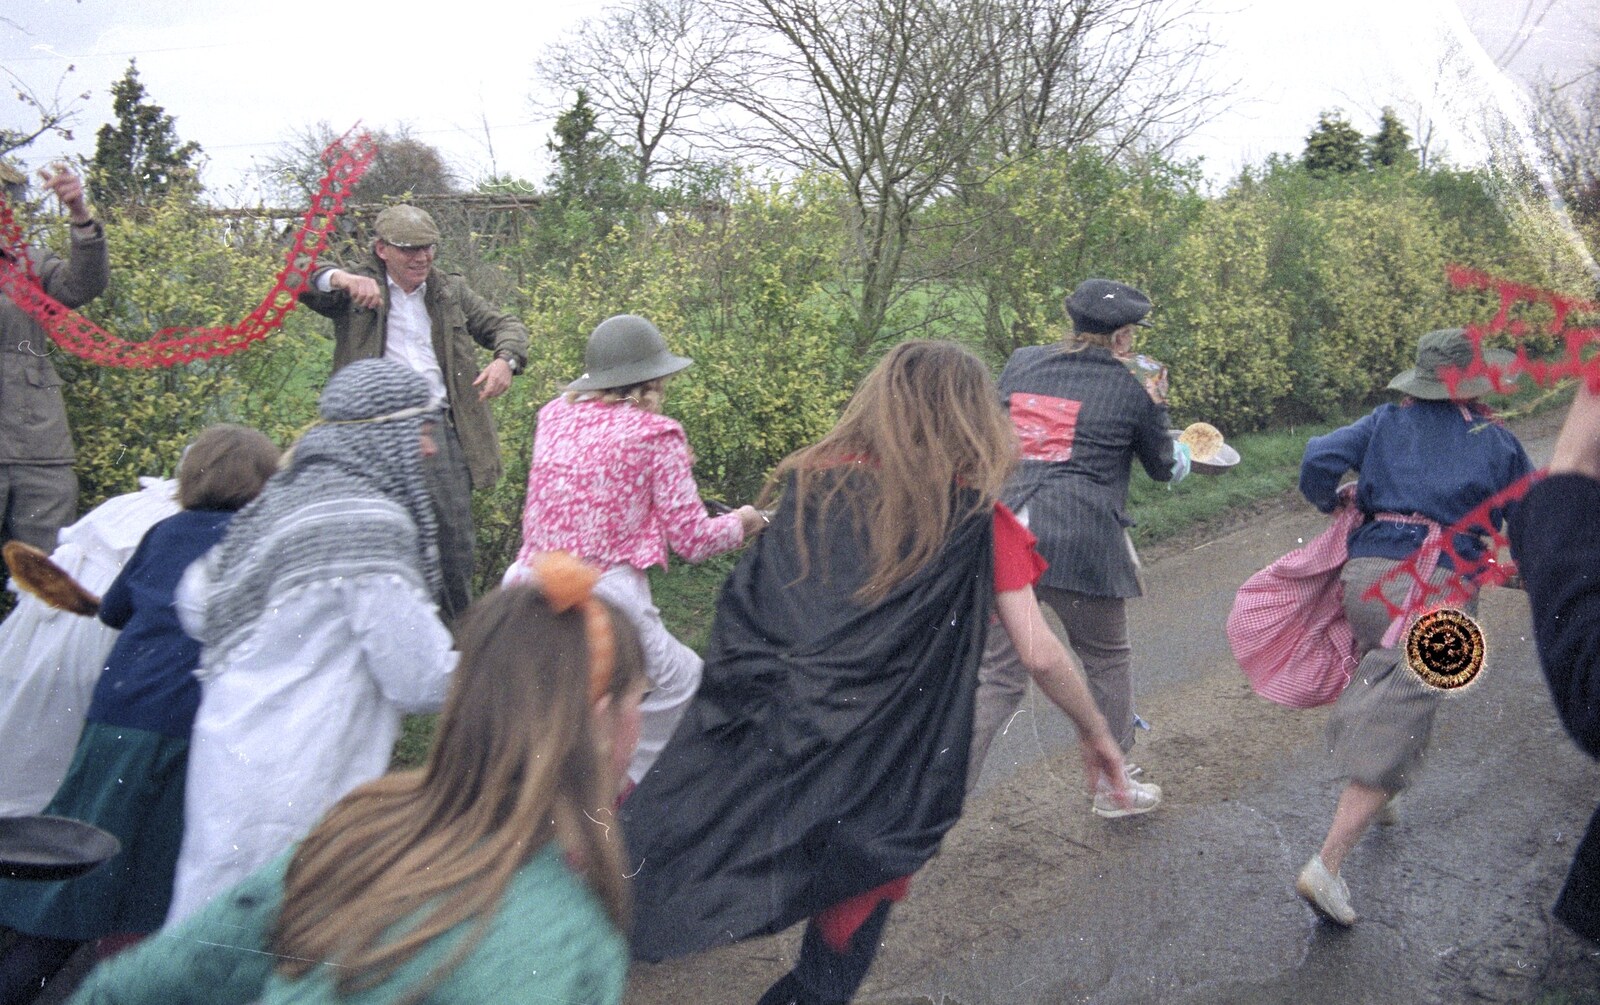 The ladies leg it down the lane from Pancake Day in Starston, Norfolk - 27th February 1990